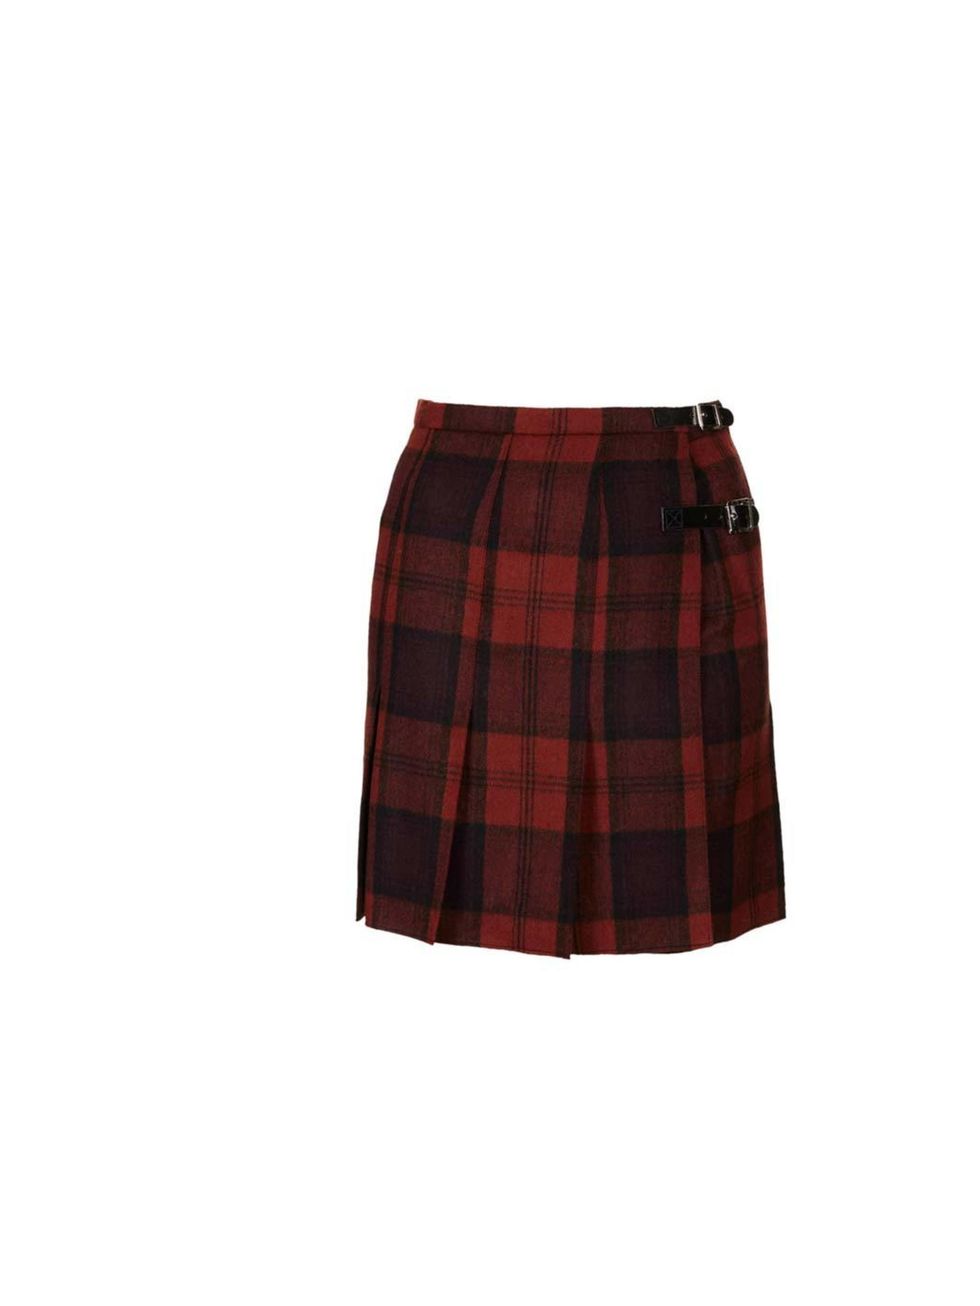 <p>Pair this tartan kilt with a white tee, leather jacket and black ankle boots for easy weekend cool.</p><p><a href="http://www.topshop.com/en/tsuk/product/new-in-this-week-2169932/new-in-this-week-493/red-check-spliced-kilt-2261523?bi=1&amp;ps=200">Tops